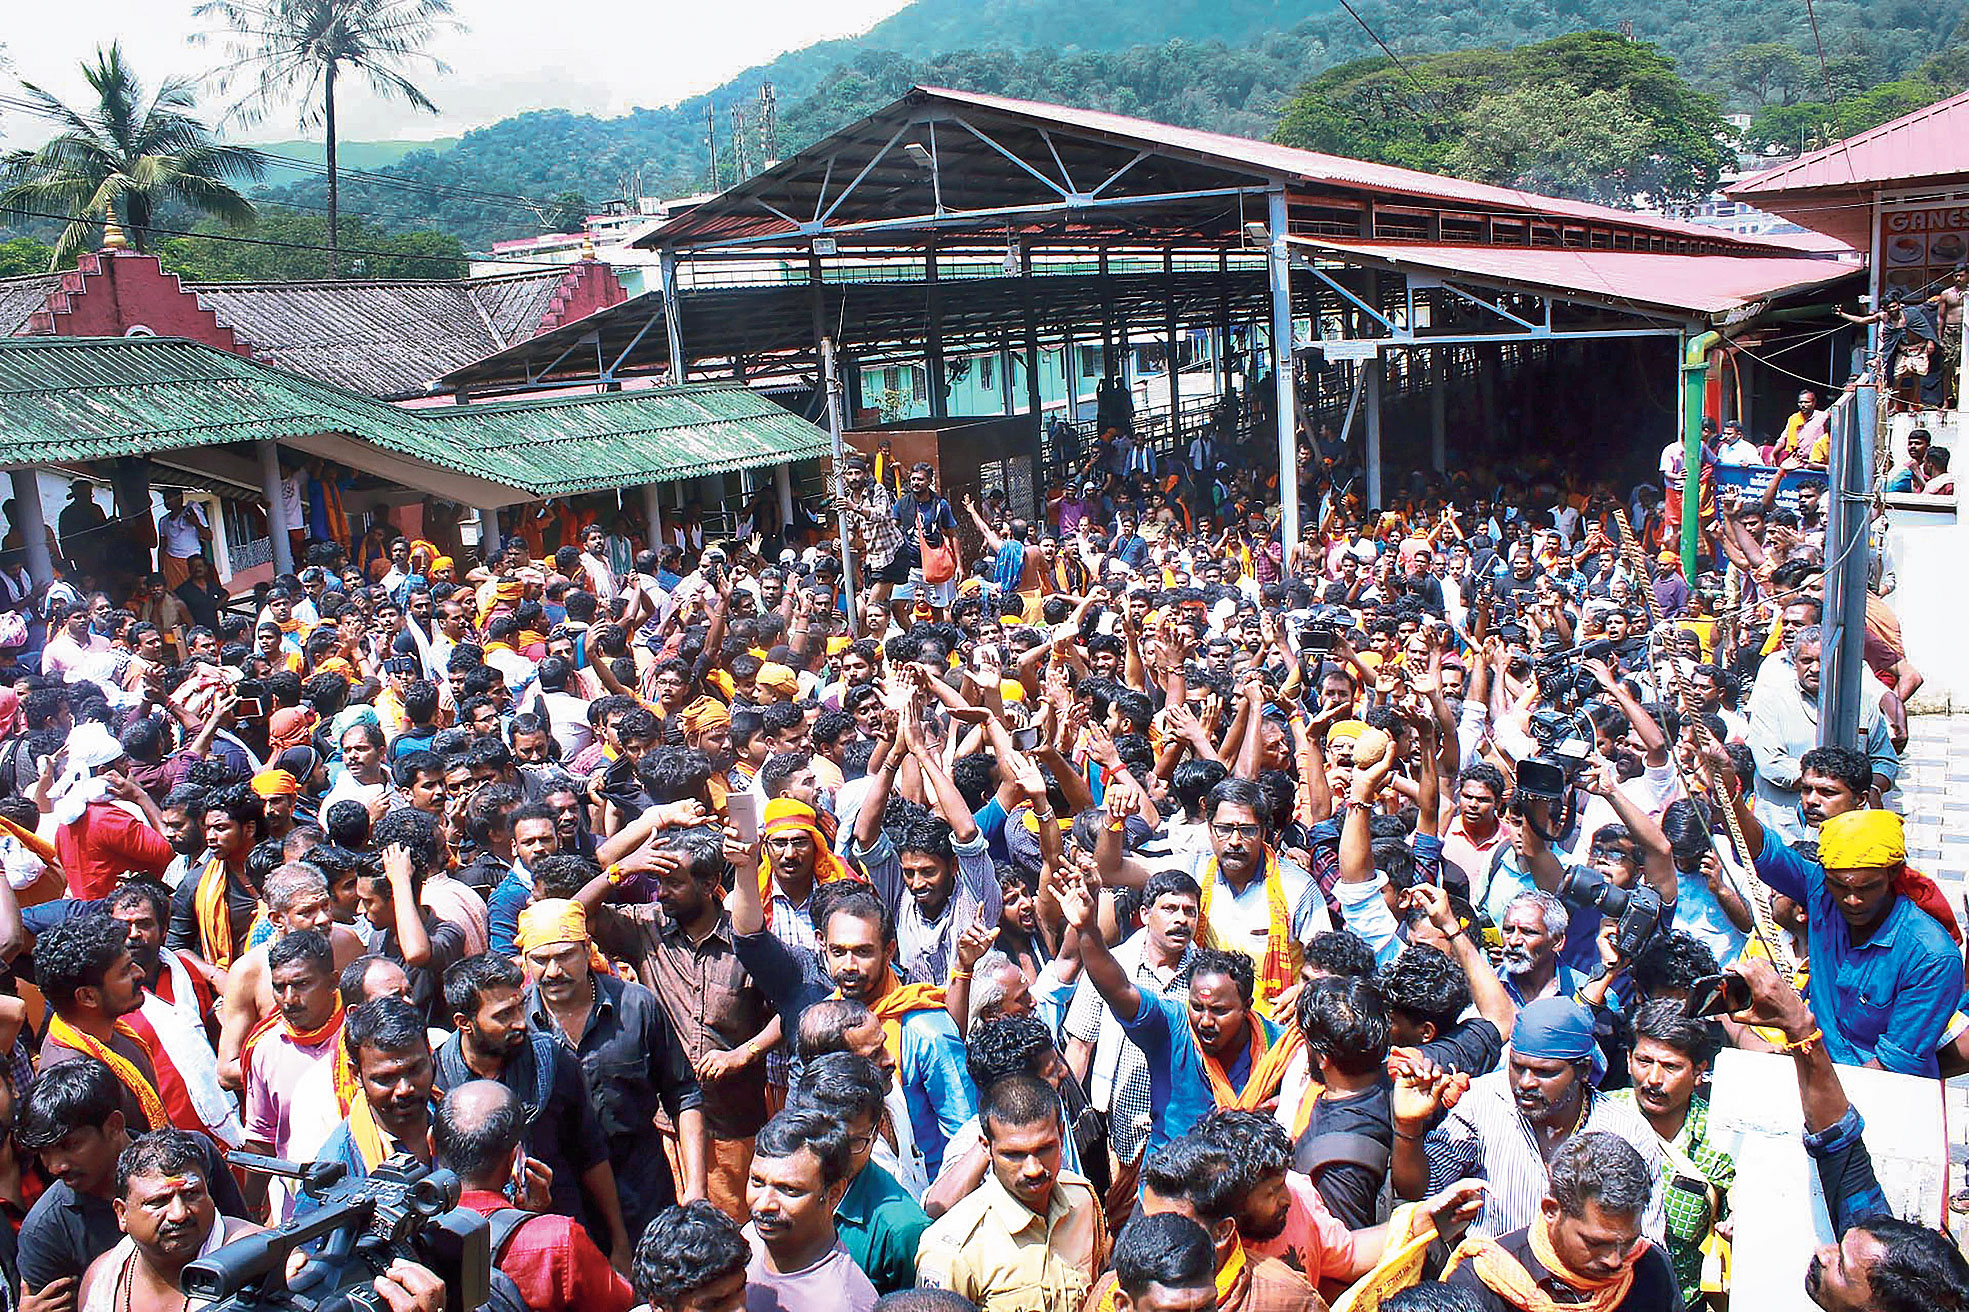 Protests break out as women arrive to offer prayers at Sabarimala temple on Sunday. The bench has by a 3:2 majority referred to a seven-judge bench the question whether women of childbearing age can enter the Sabarimala temple.

